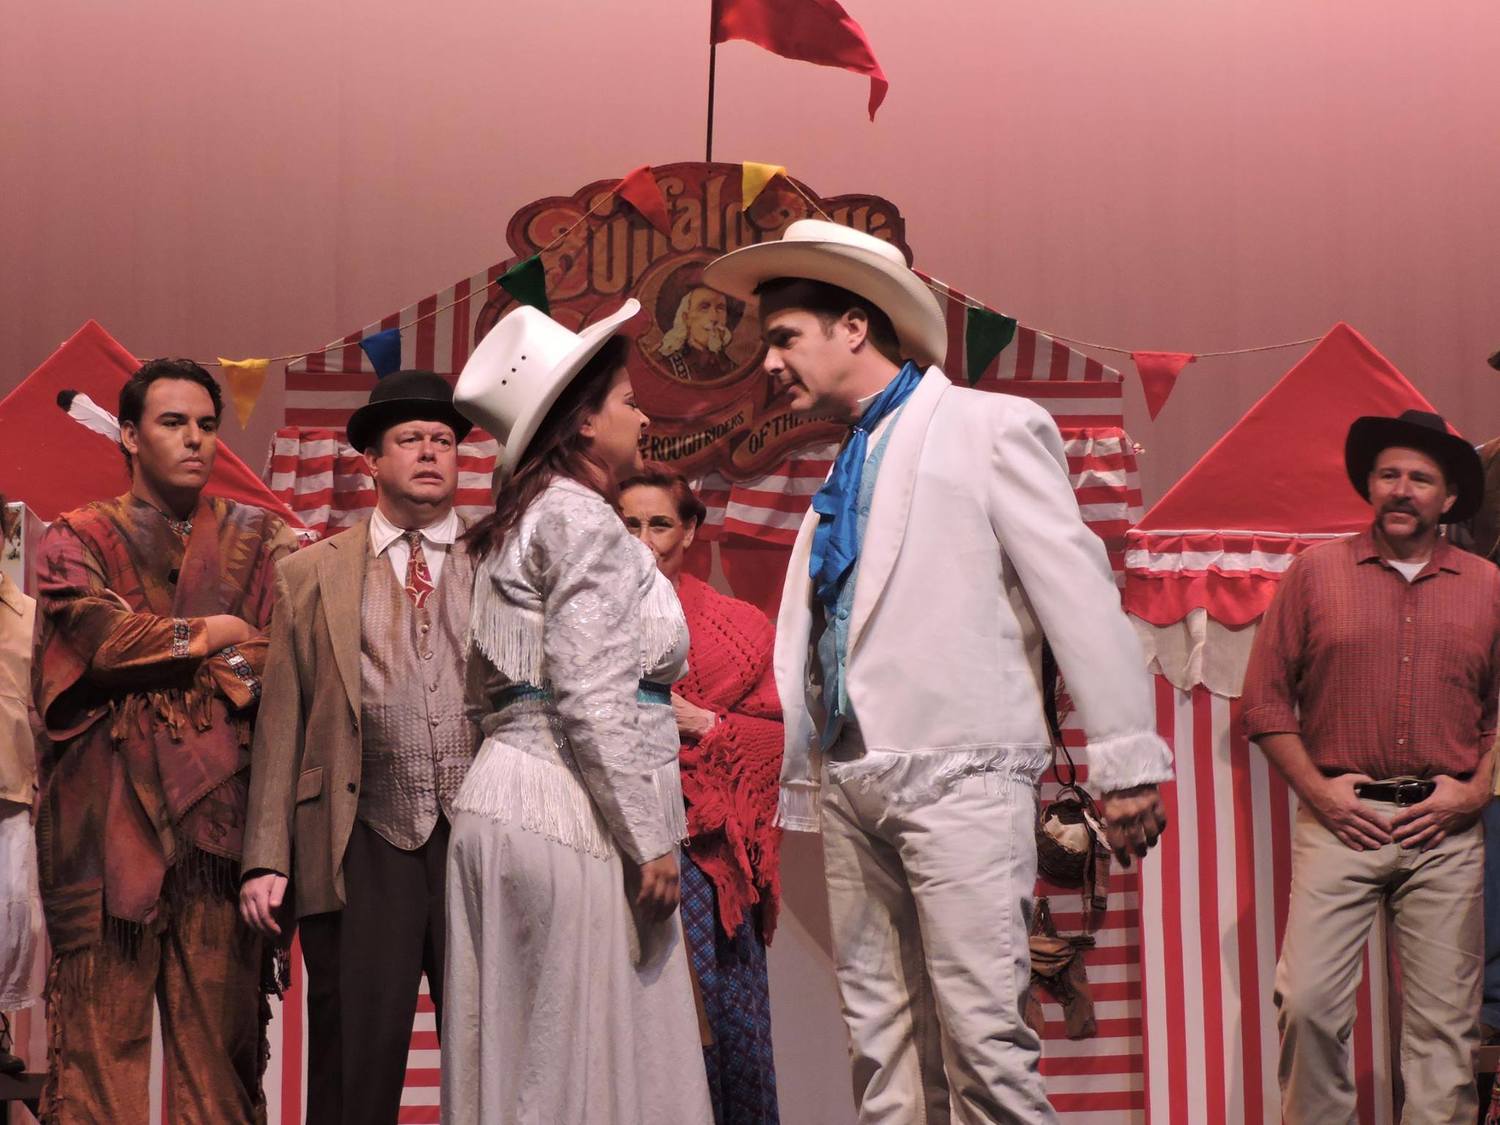 Jordana Forrest as Annie Oakley and James Skiba as Frank Butler in the Curtain Call Playhouse production of Annie Get Your Gun. https://www.facebook.com/events/400787620075871/?ref_dashboard_filter=upcoming